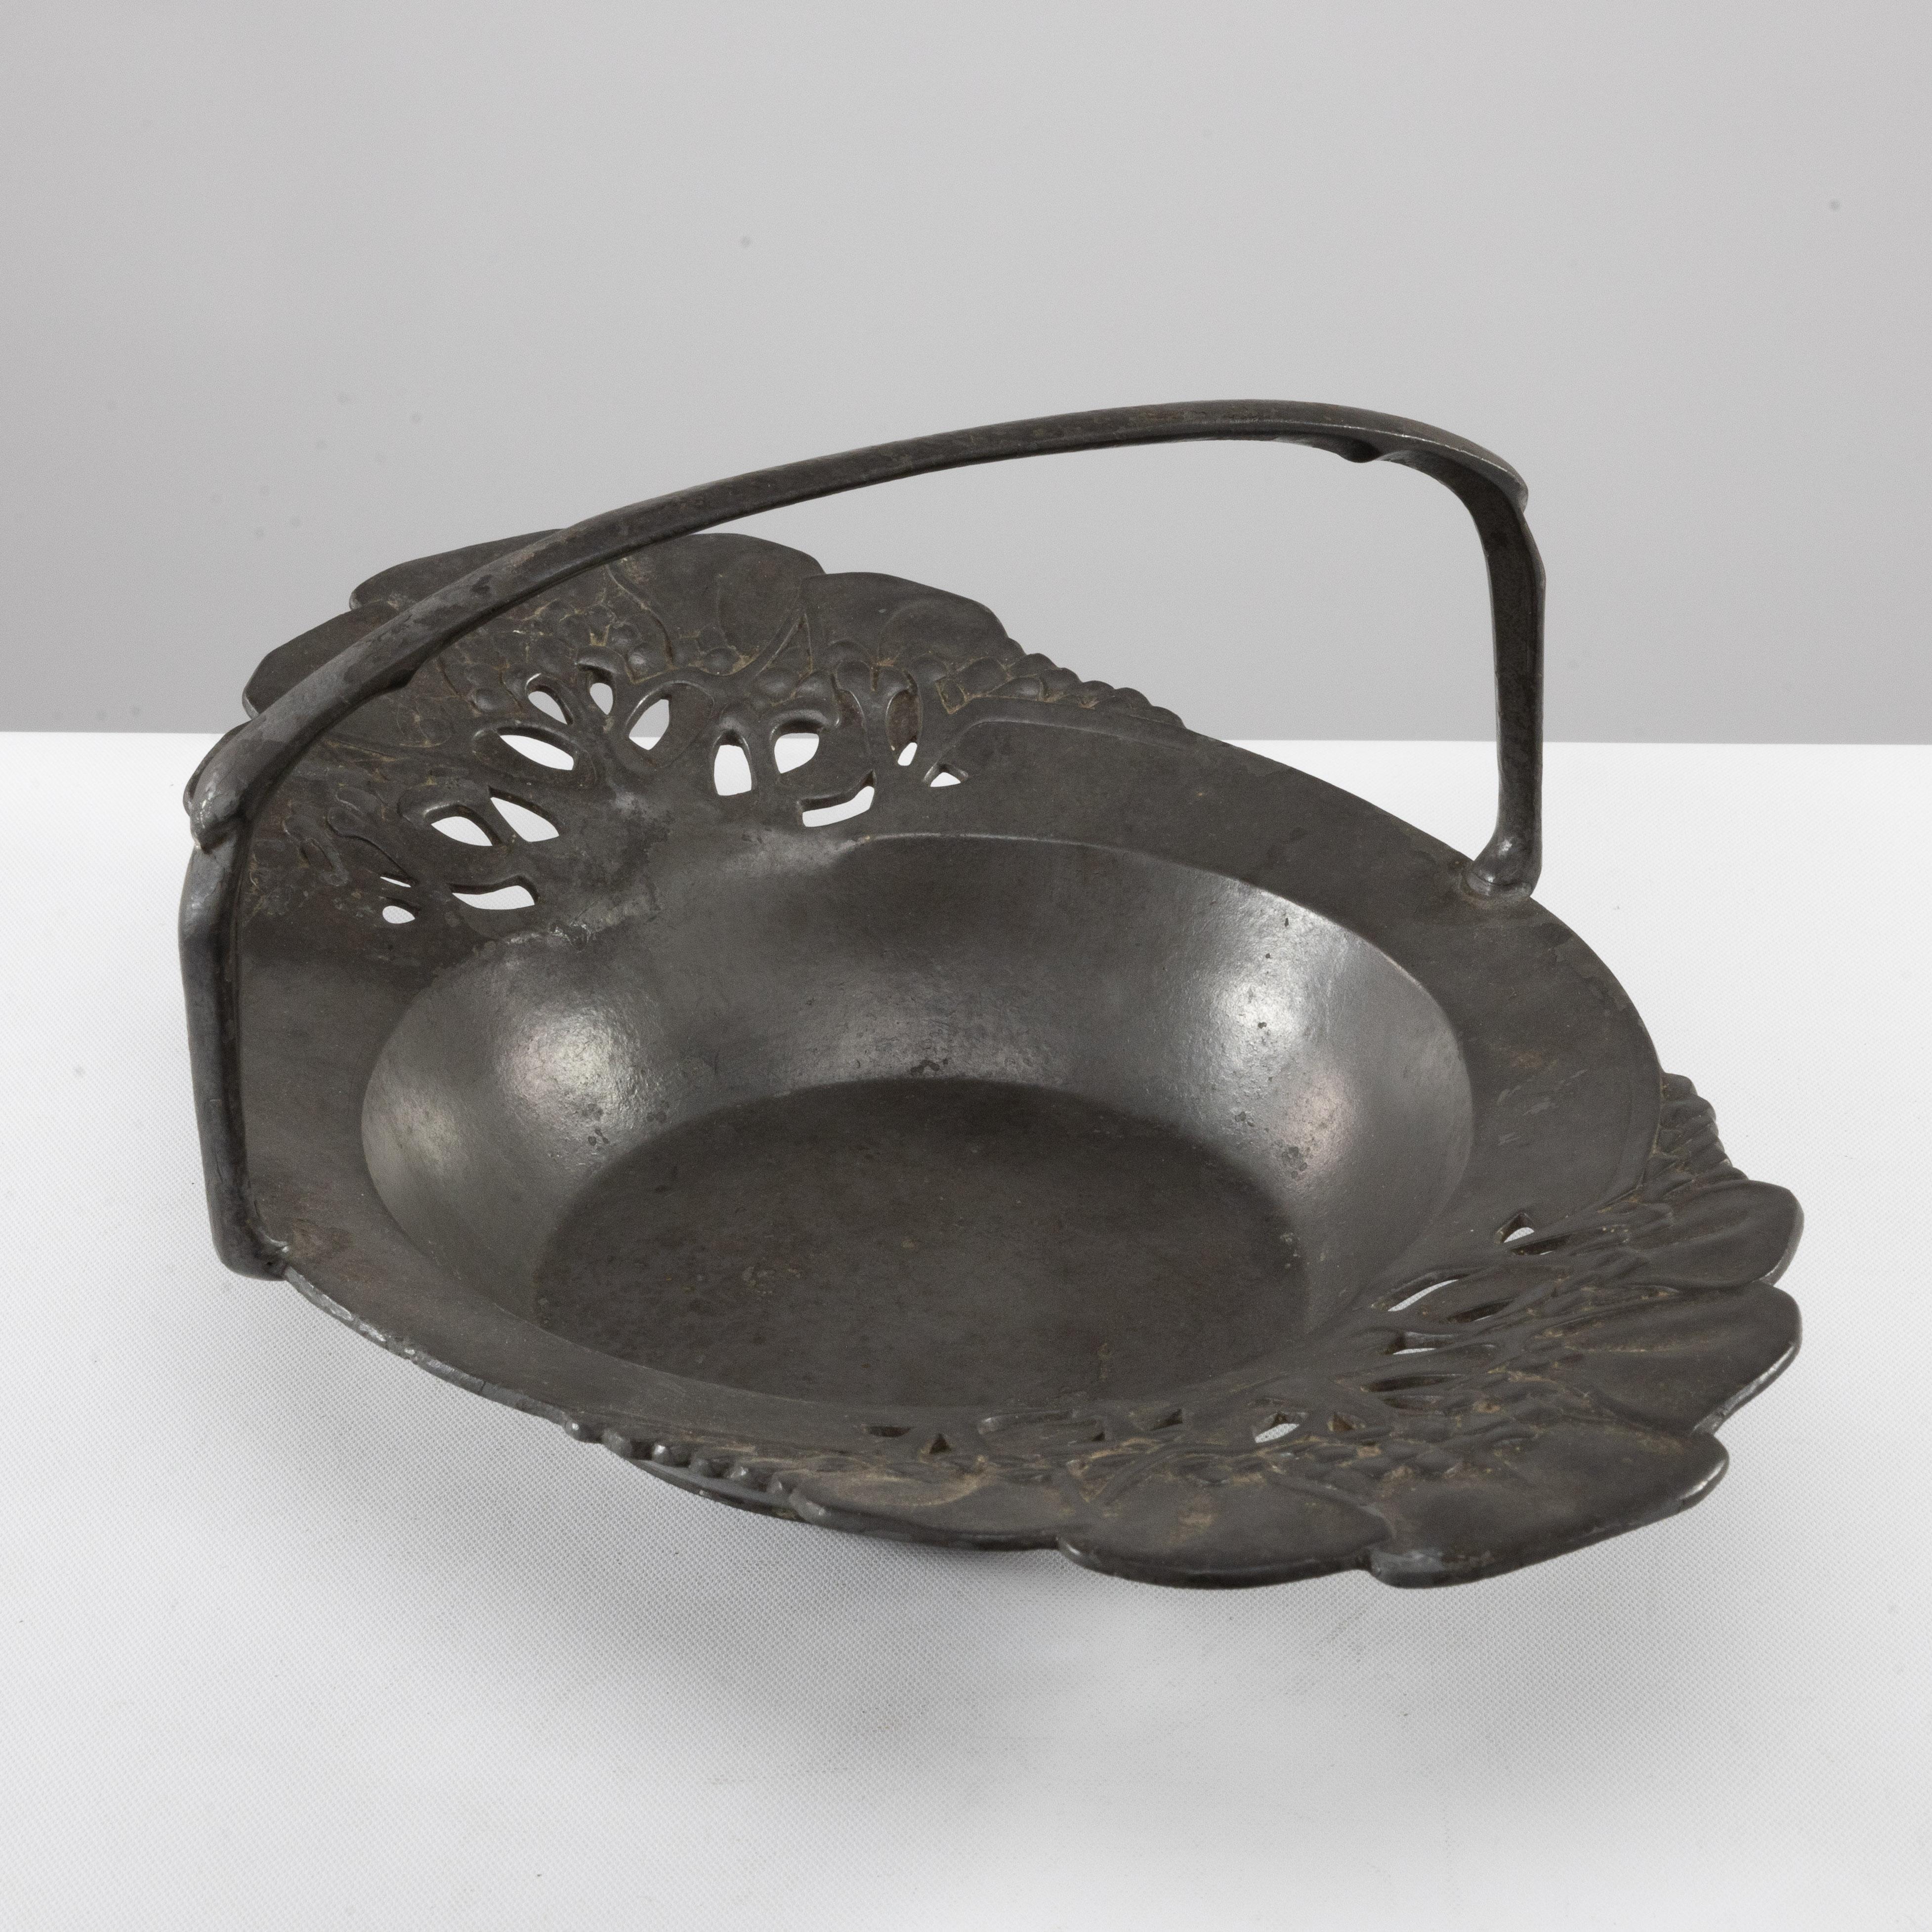 Urania Pewter Ware Maastricht, Holland.
An Art Nouveau pewter fruit or bread bowl with a loop handle floral decoration to the sides.
Urania was founded in 1902. Hubert Regout’s original name for the business was “NV Kuntszinn, but he changed it to